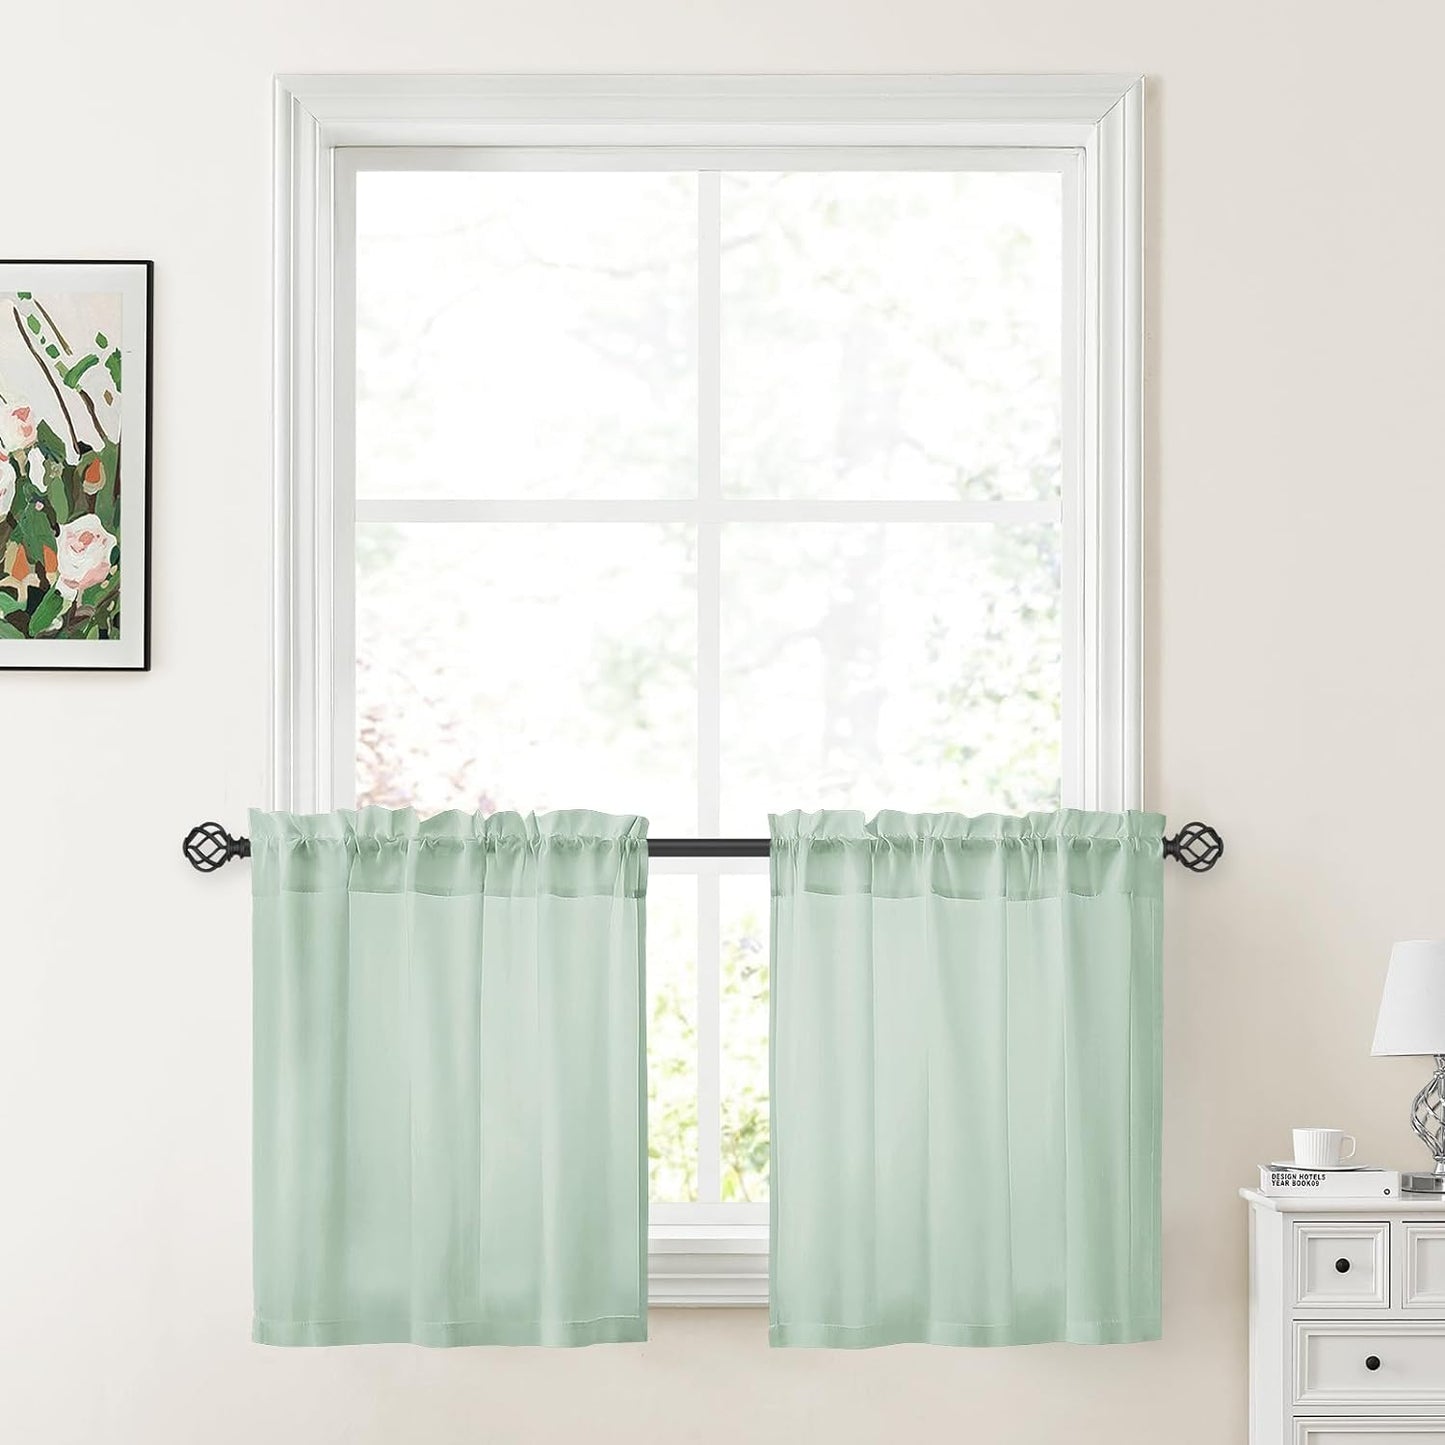 HOMEIDEAS Non-See-Through White Privacy Sheer Curtains 52 X 84 Inches Long 2 Panels Semi Sheer Curtains Light Filtering Window Curtains Drapes for Bedroom Living Room  HOMEIDEAS Sage Green W30" X L24" 